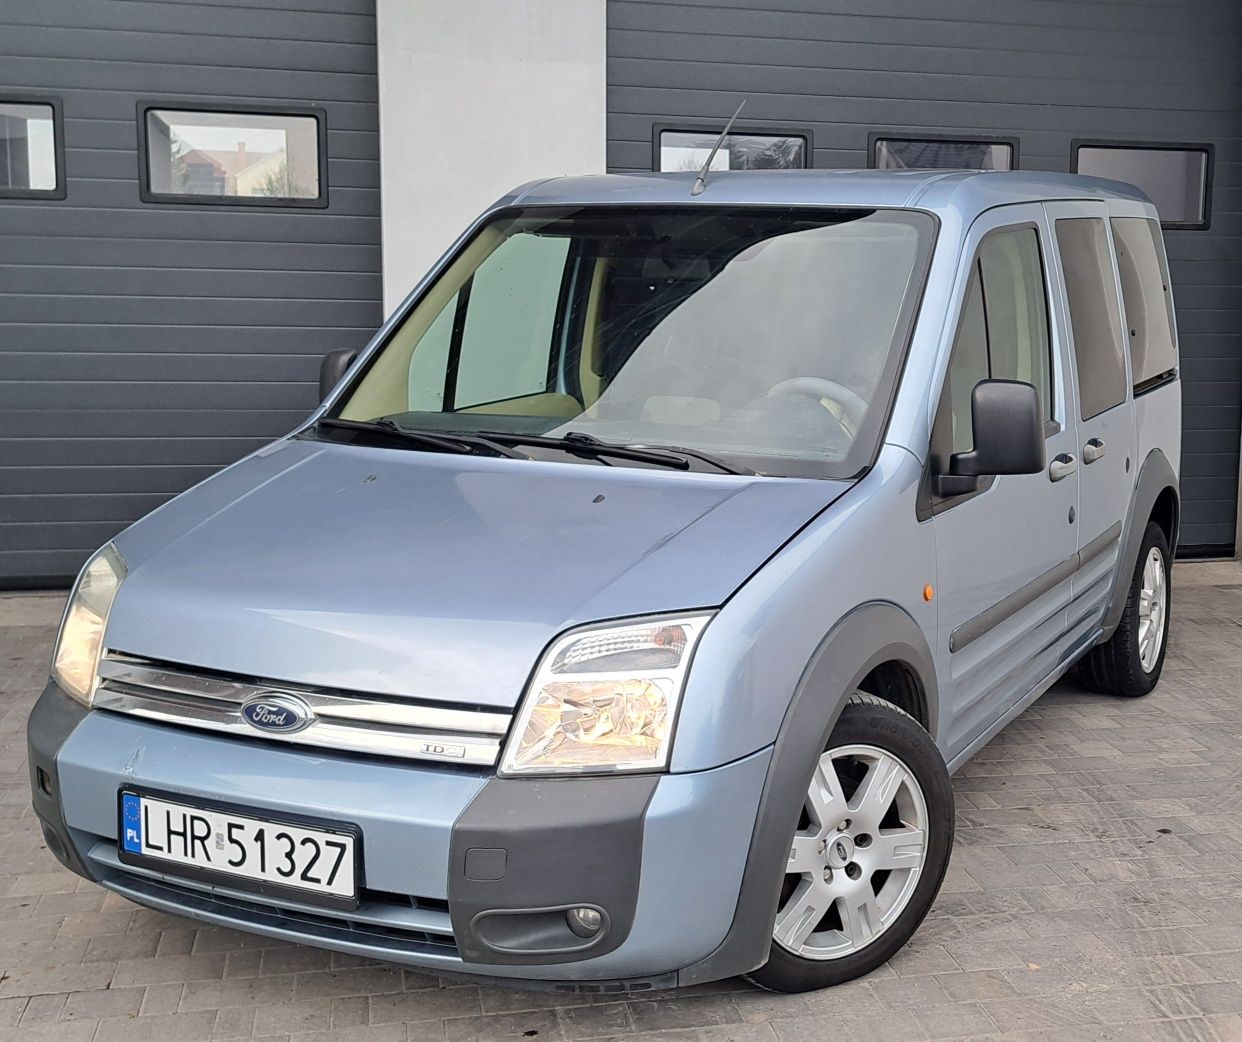 Ford Tourneo Connect 1.8 Tdci diesel osobowy zamiana